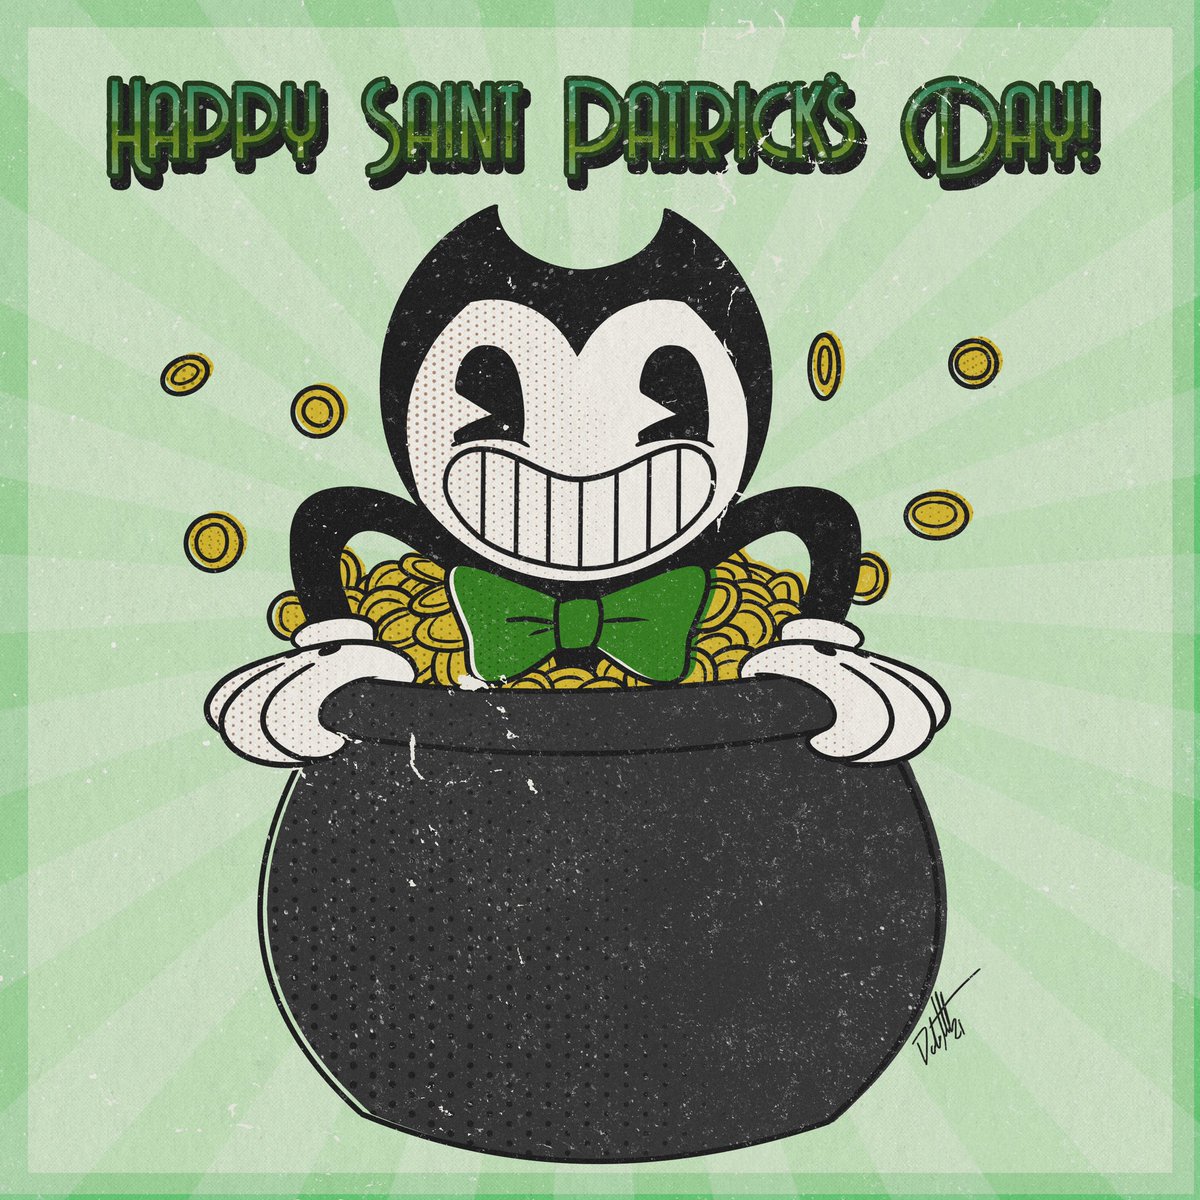 It’s your lucky day! Have a wonderful Saint Patrick’s Day! #BENDY #BATIM #Bendy_and_the_ink_machine